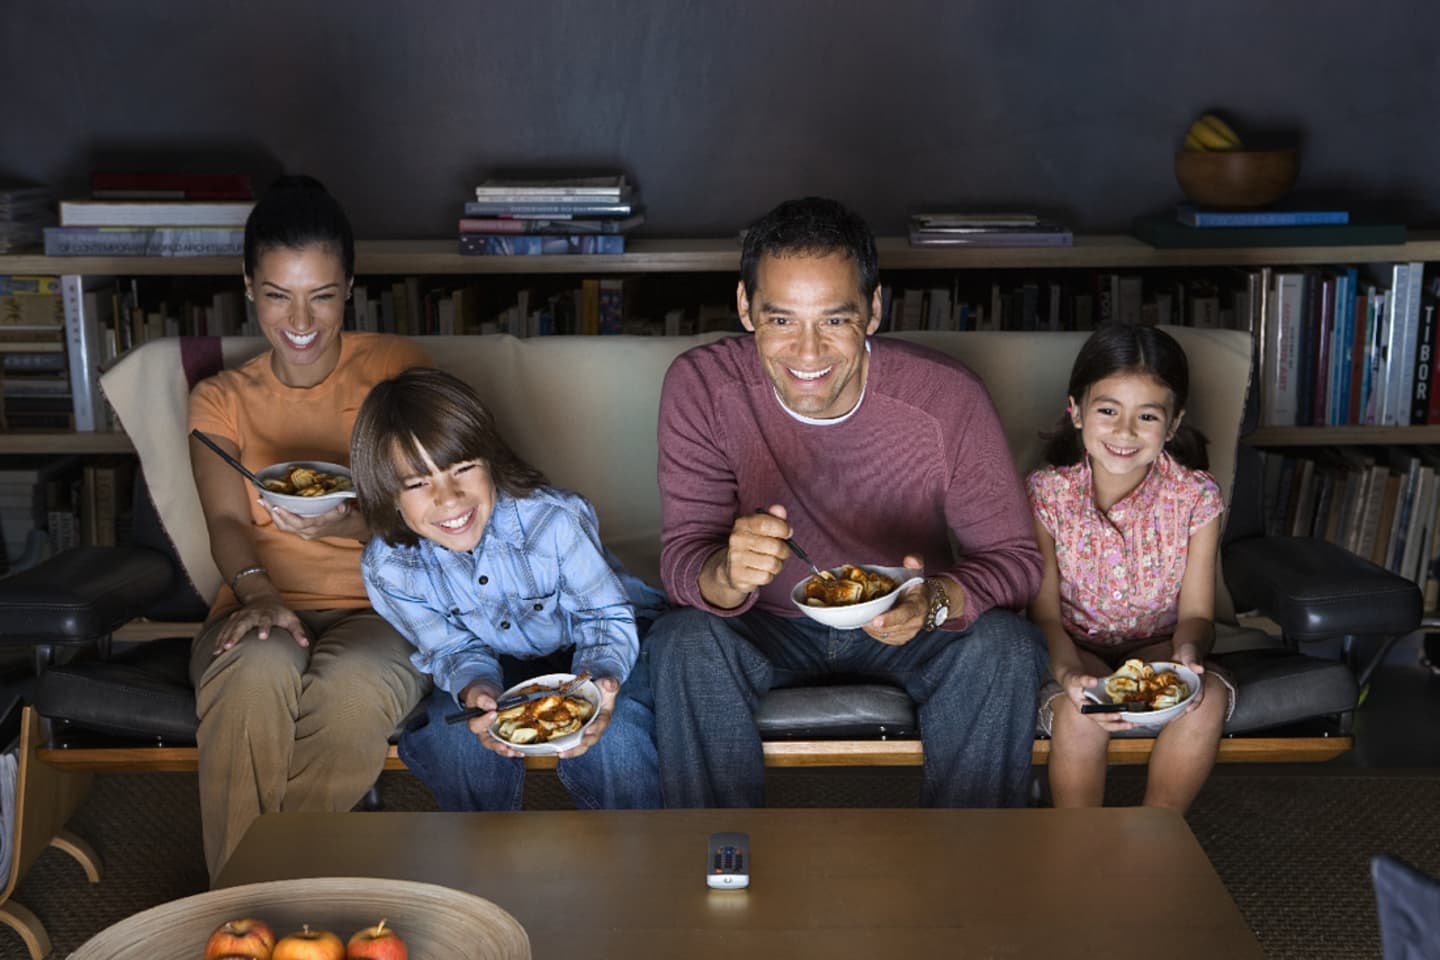 General Mills Brazil - A happy family enjoying a meal together on a cozy couch